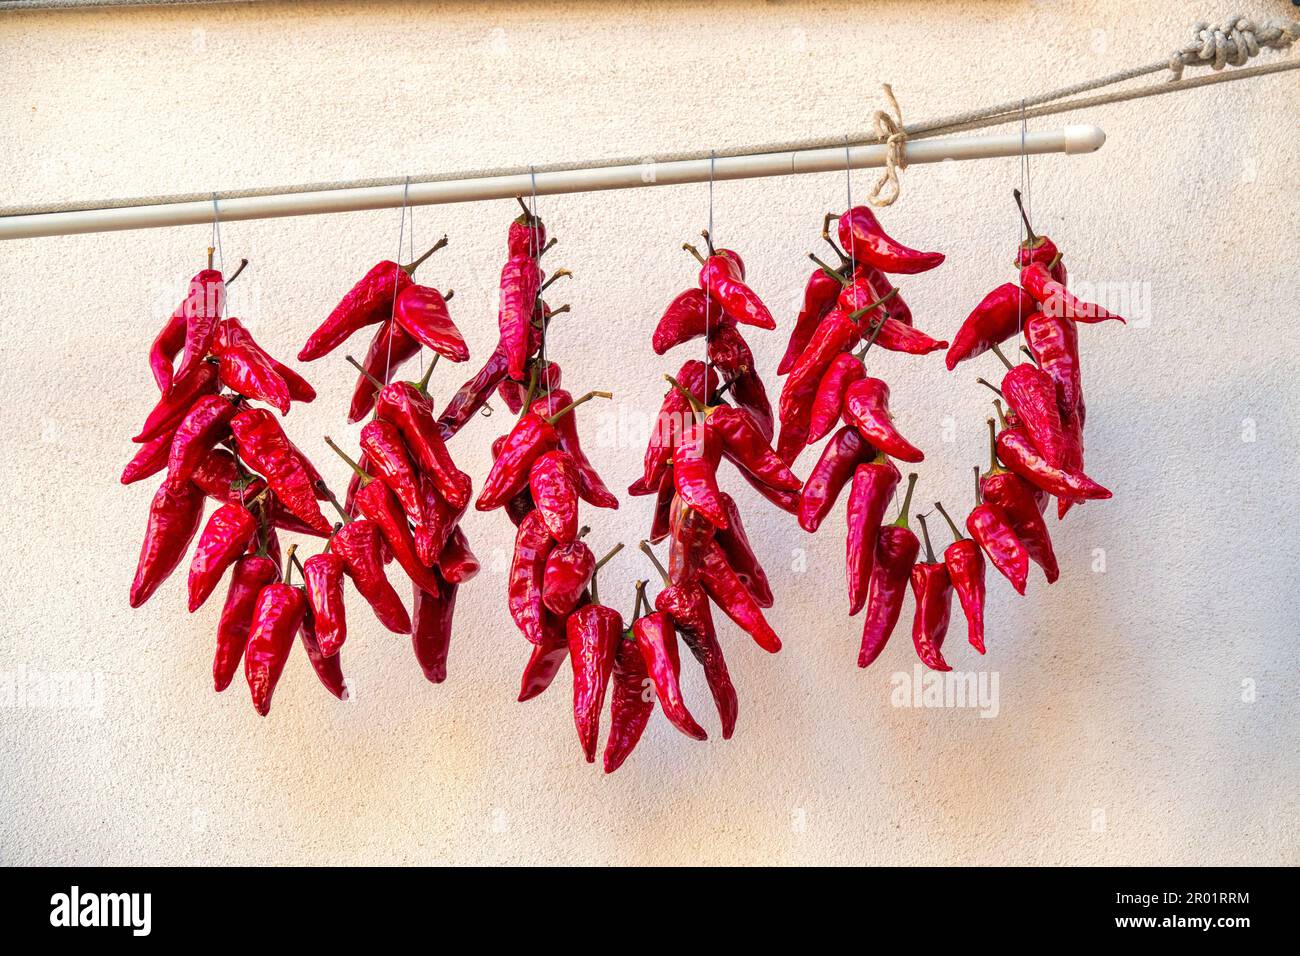 Sun drying chili peppers on a wall in Pianella, Italy Stock Photo